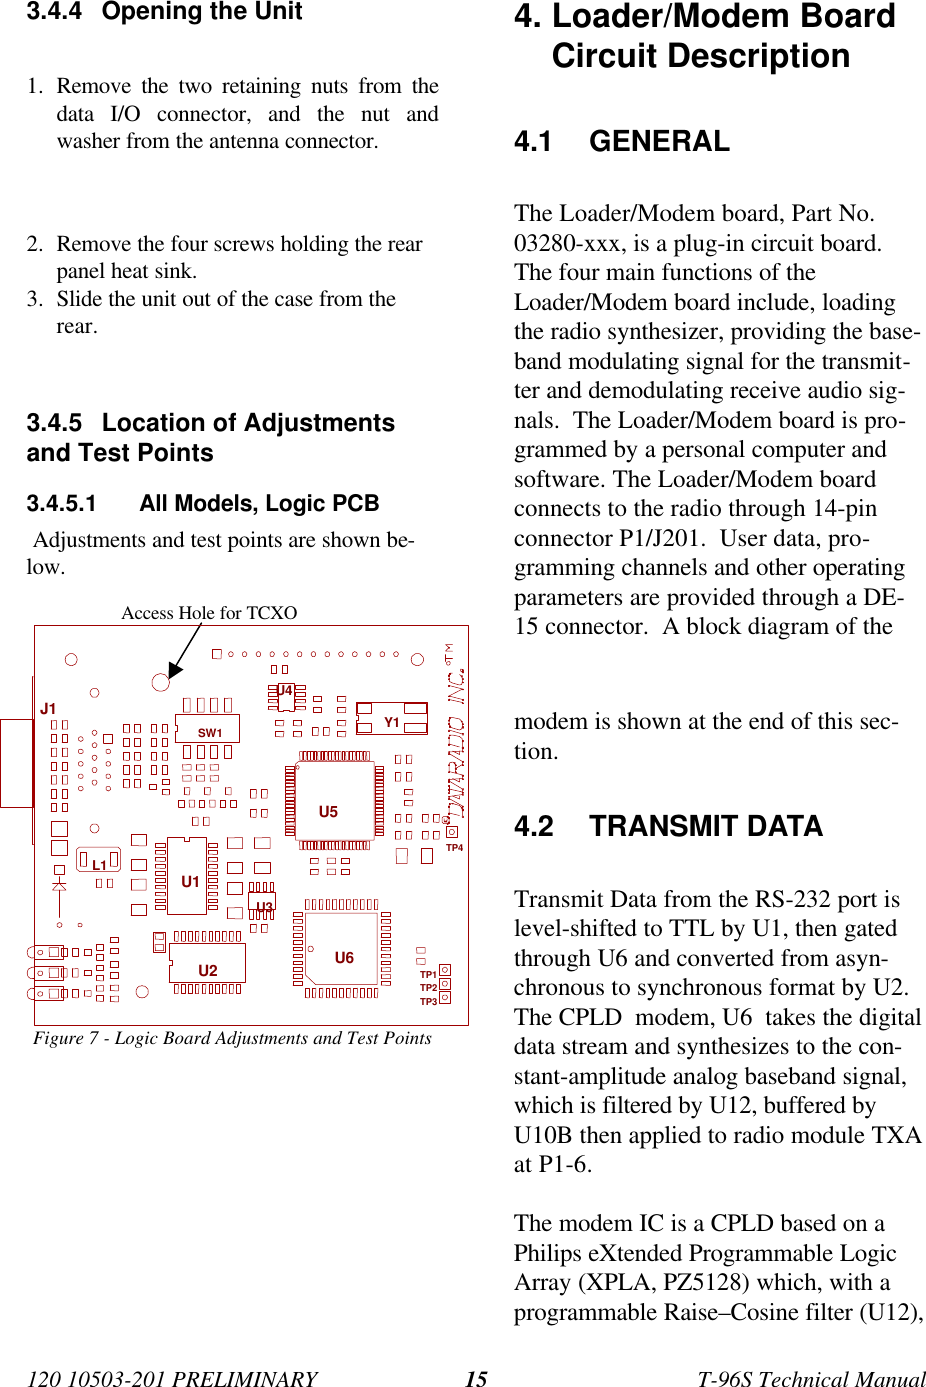 120 10503-201 PRELIMINARY T-96S Technical Manual153.4.4 Opening the Unit1. Remove the two retaining nuts from thedata I/O connector, and the nut andwasher from the antenna connector.2. Remove the four screws holding the rearpanel heat sink.3. Slide the unit out of the case from therear.3.4.5 Location of Adjustmentsand Test Points3.4.5.1 All Models, Logic PCB Adjustments and test points are shown be-low.Figure 7 - Logic Board Adjustments and Test Points4. Loader/Modem BoardCircuit Description4.1 GENERALThe Loader/Modem board, Part No.03280-xxx, is a plug-in circuit board.The four main functions of theLoader/Modem board include, loadingthe radio synthesizer, providing the base-band modulating signal for the transmit-ter and demodulating receive audio sig-nals.  The Loader/Modem board is pro-grammed by a personal computer andsoftware. The Loader/Modem boardconnects to the radio through 14-pinconnector P1/J201.  User data, pro-gramming channels and other operatingparameters are provided through a DE-15 connector.  A block diagram of themodem is shown at the end of this sec-tion.4.2 TRANSMIT DATATransmit Data from the RS-232 port islevel-shifted to TTL by U1, then gatedthrough U6 and converted from asyn-chronous to synchronous format by U2.The CPLD  modem, U6  takes the digitaldata stream and synthesizes to the con-stant-amplitude analog baseband signal,which is filtered by U12, buffered byU10B then applied to radio module TXAat P1-6.The modem IC is a CPLD based on aPhilips eXtended Programmable LogicArray (XPLA, PZ5128) which, with aprogrammable Raise–Cosine filter (U12),Access Hole for TCXOSW1L1TP2TP4Y1U3U6U2U1U4TP1TP3U5J1